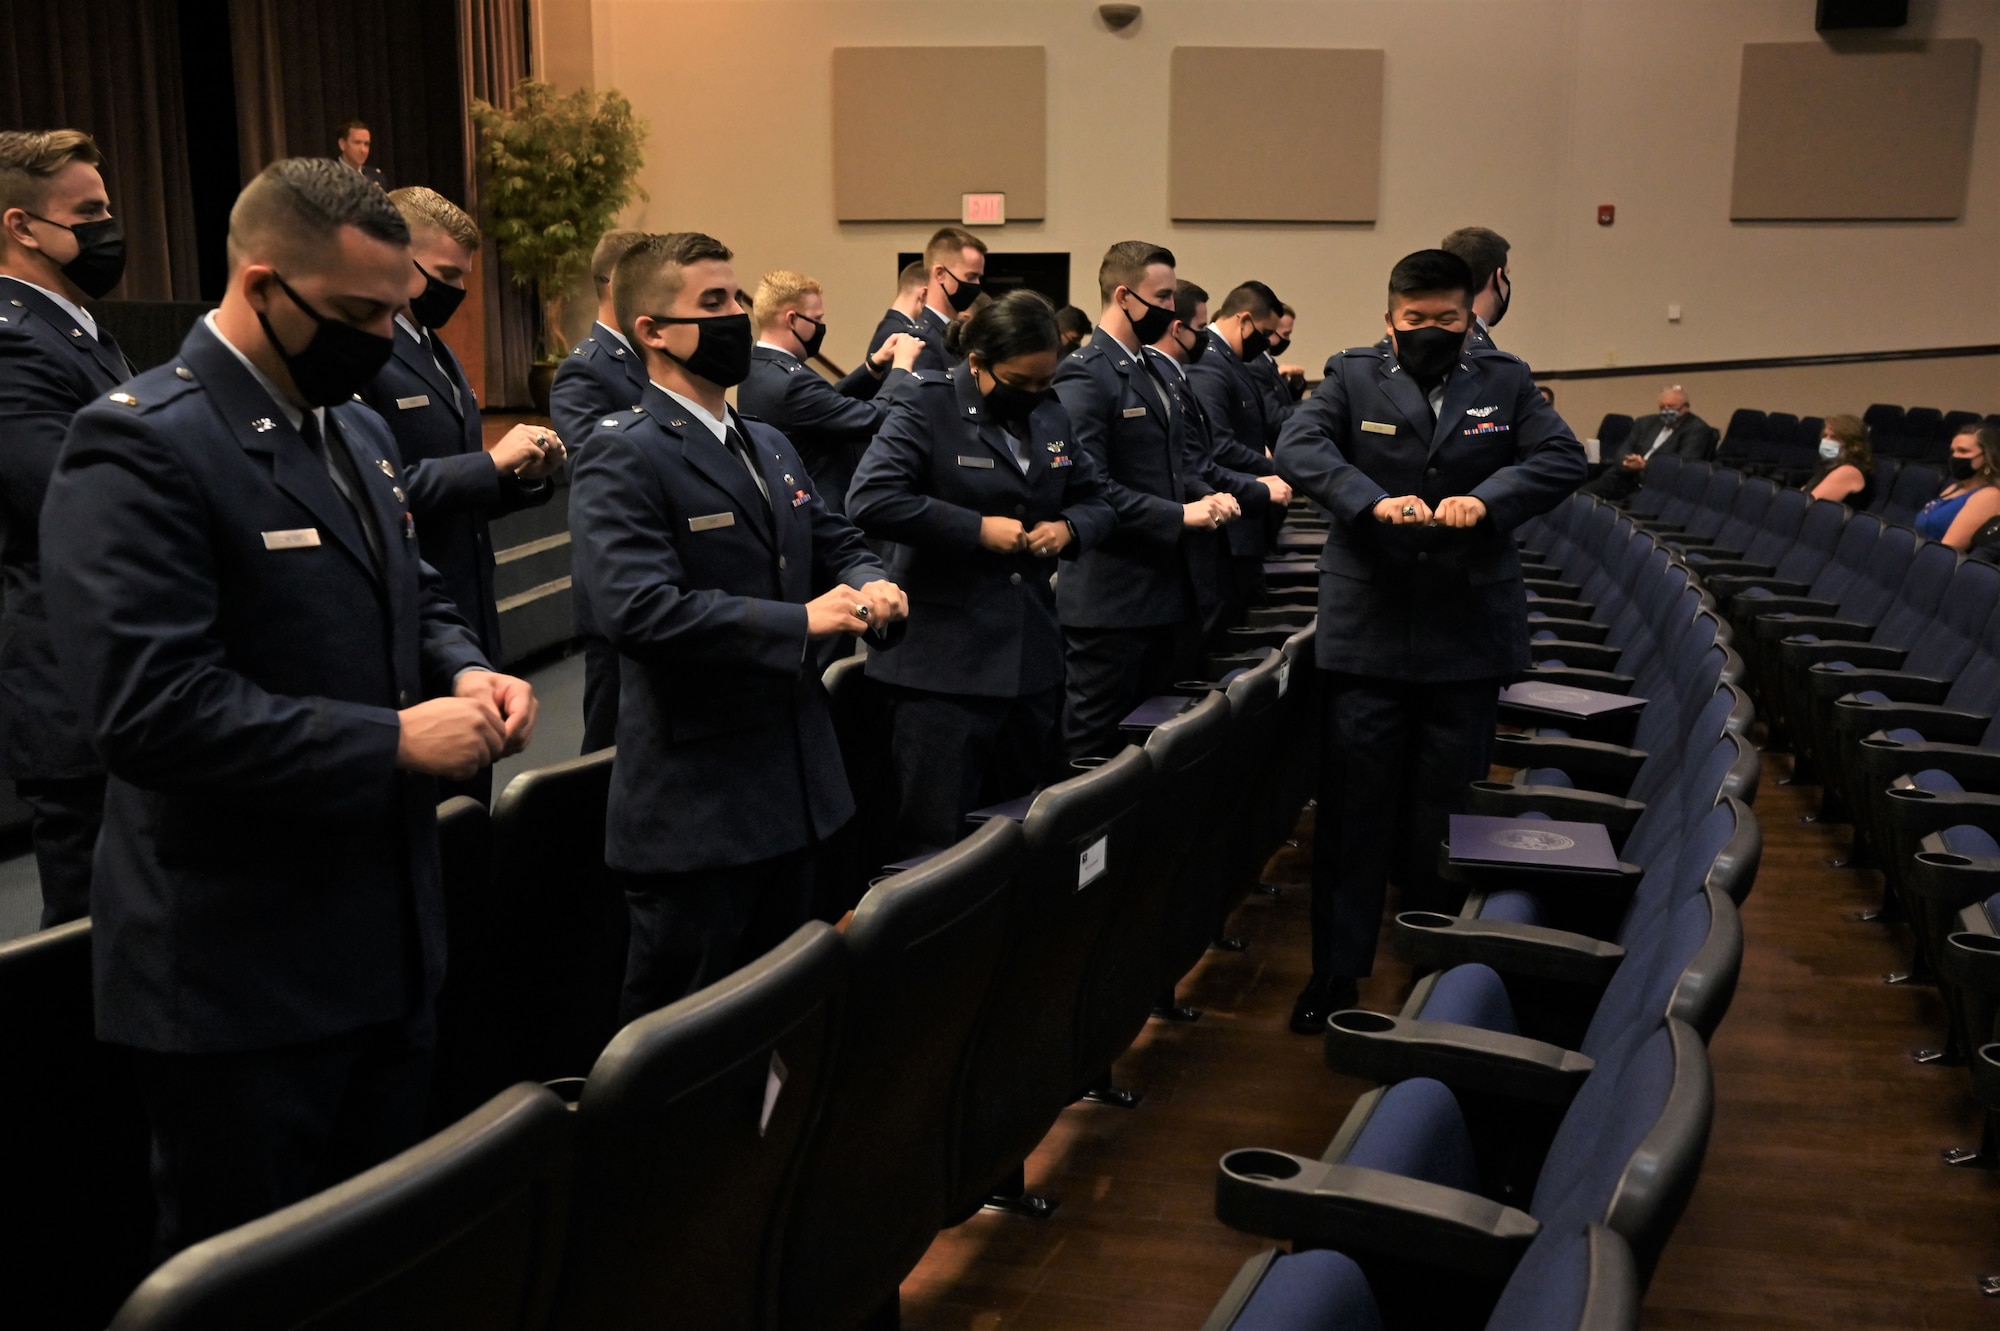 Graduates from Specialized Undergraduate Pilot Training class 21-15, break their first pair of wings during the graduation ceremony, Sept. 10, 2021, on Columbus Air Force Base, Miss. Per tradition, pilots will keep one half of the broken wings and give the second half to a loved one. The two halves are never to be brought back together while the pilot is still alive. (U.S. Air Force photo by Senior Airman Jake Jacobsen)